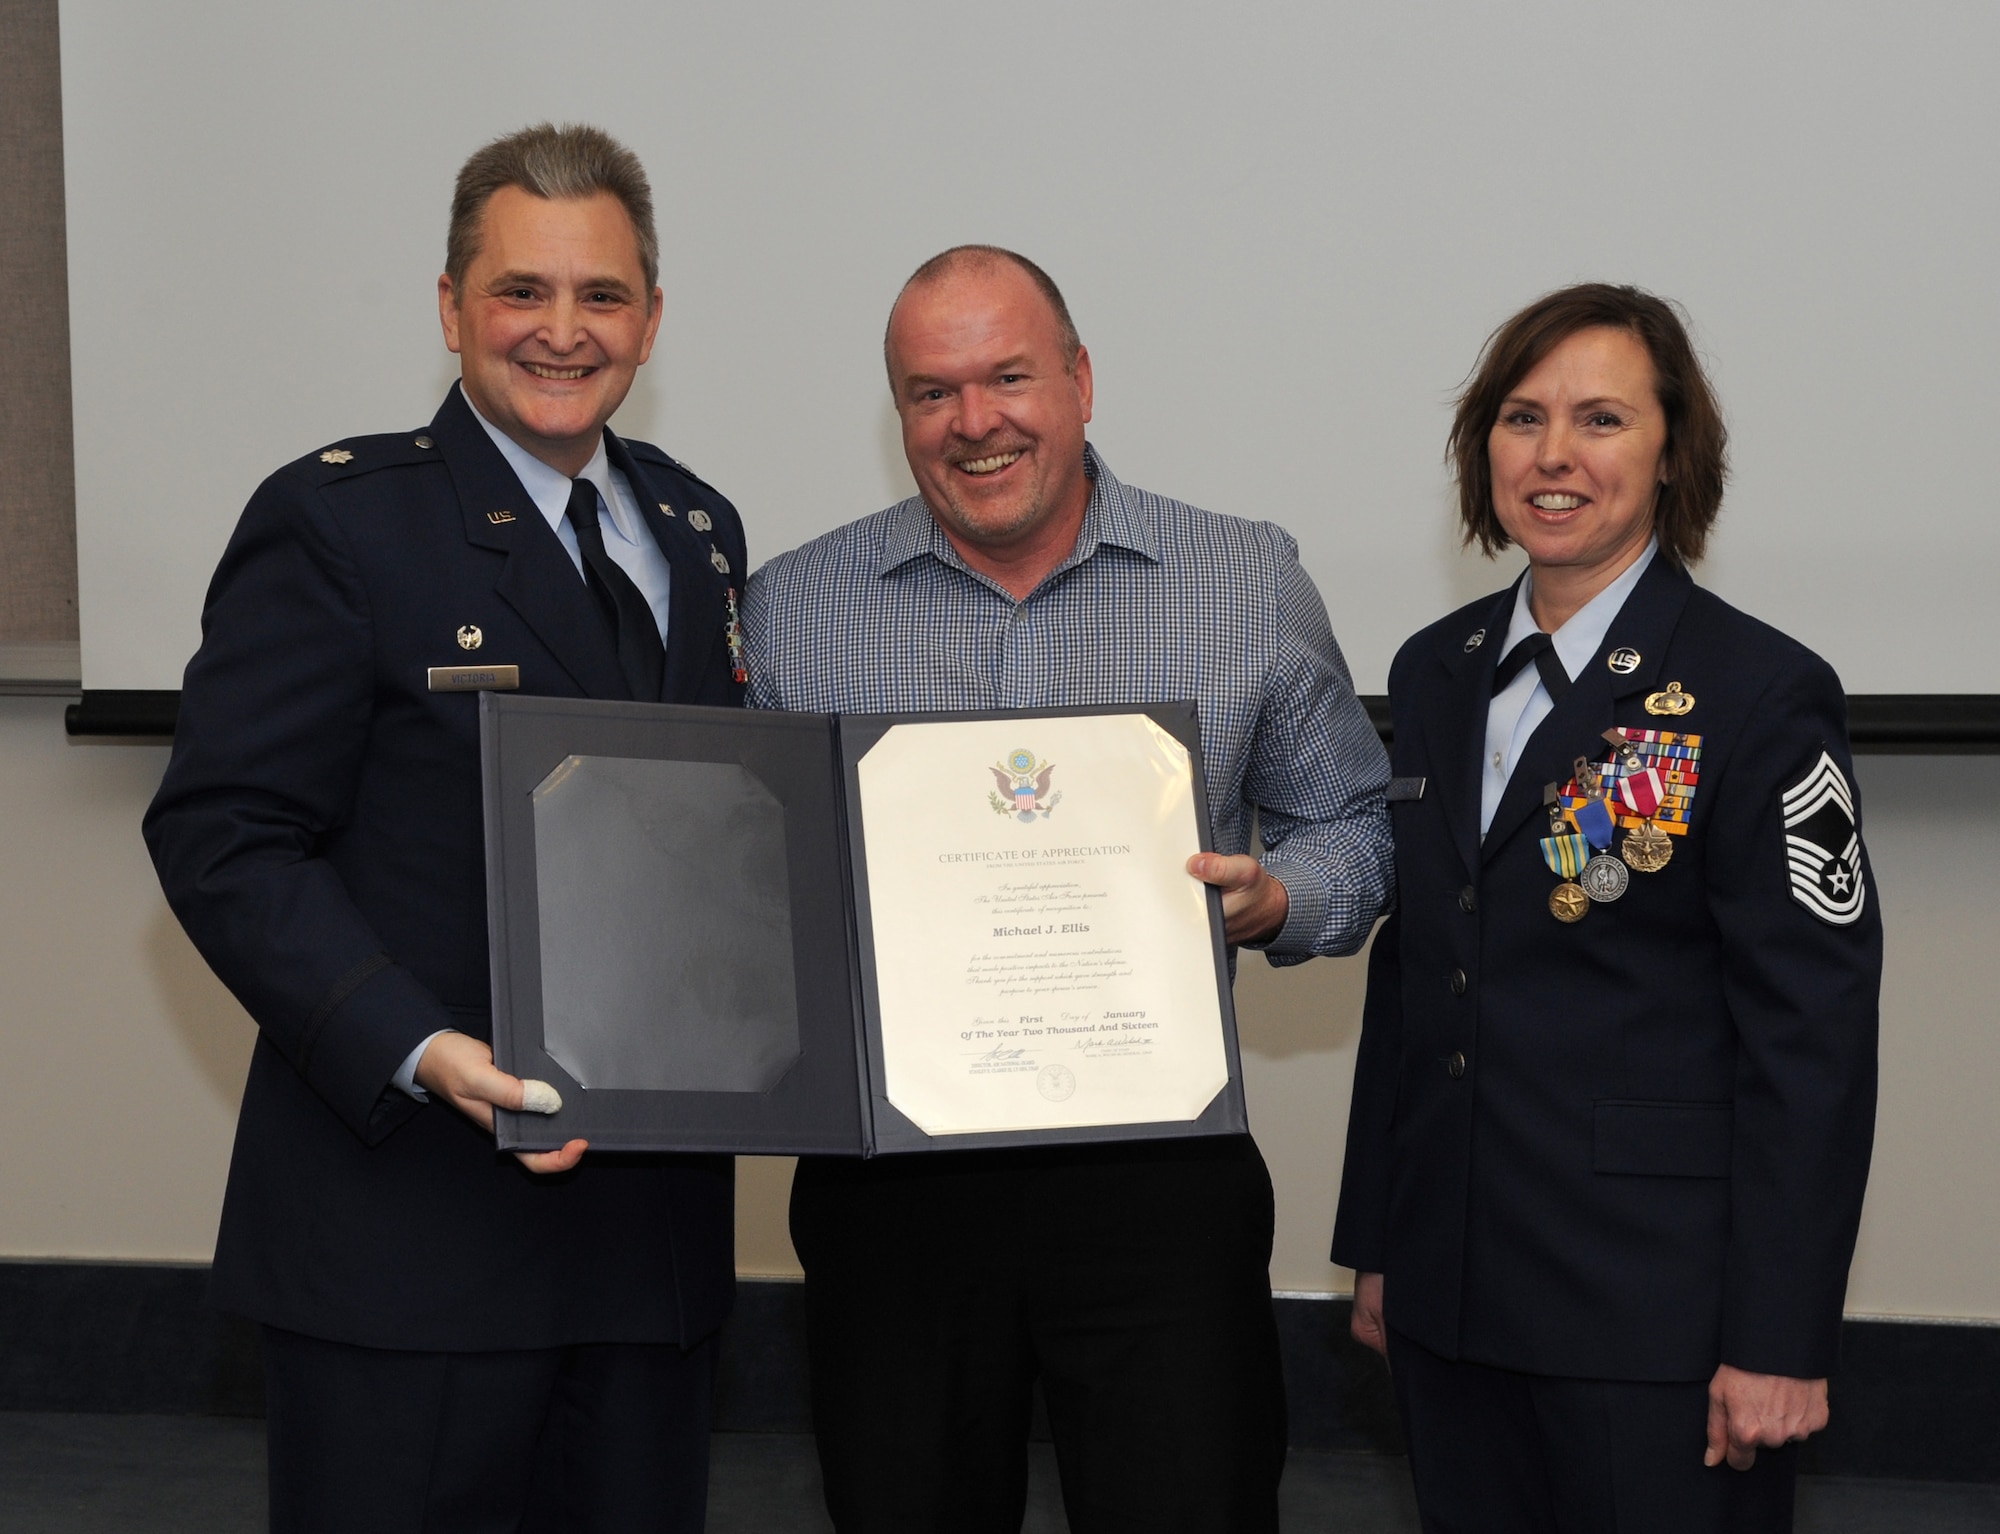 Oregon Air National Guard Lt. Col. Anthony Victoria, 142nd Fighter Wing Force Support Squadron commander, left, presents a Certificate of Appreciation from the United States Air Force to Michael Ellis, center, during a formal retirement ceremony from the Air National Guard for Chief Master Sgt. Jean Allen, right, Dec. 22, 2015, Portland Air National Guard Base, Ore. (Air National Guard photo by Tech. Sgt. John Hughel, 142nd Fighter Wing Public Affairs)